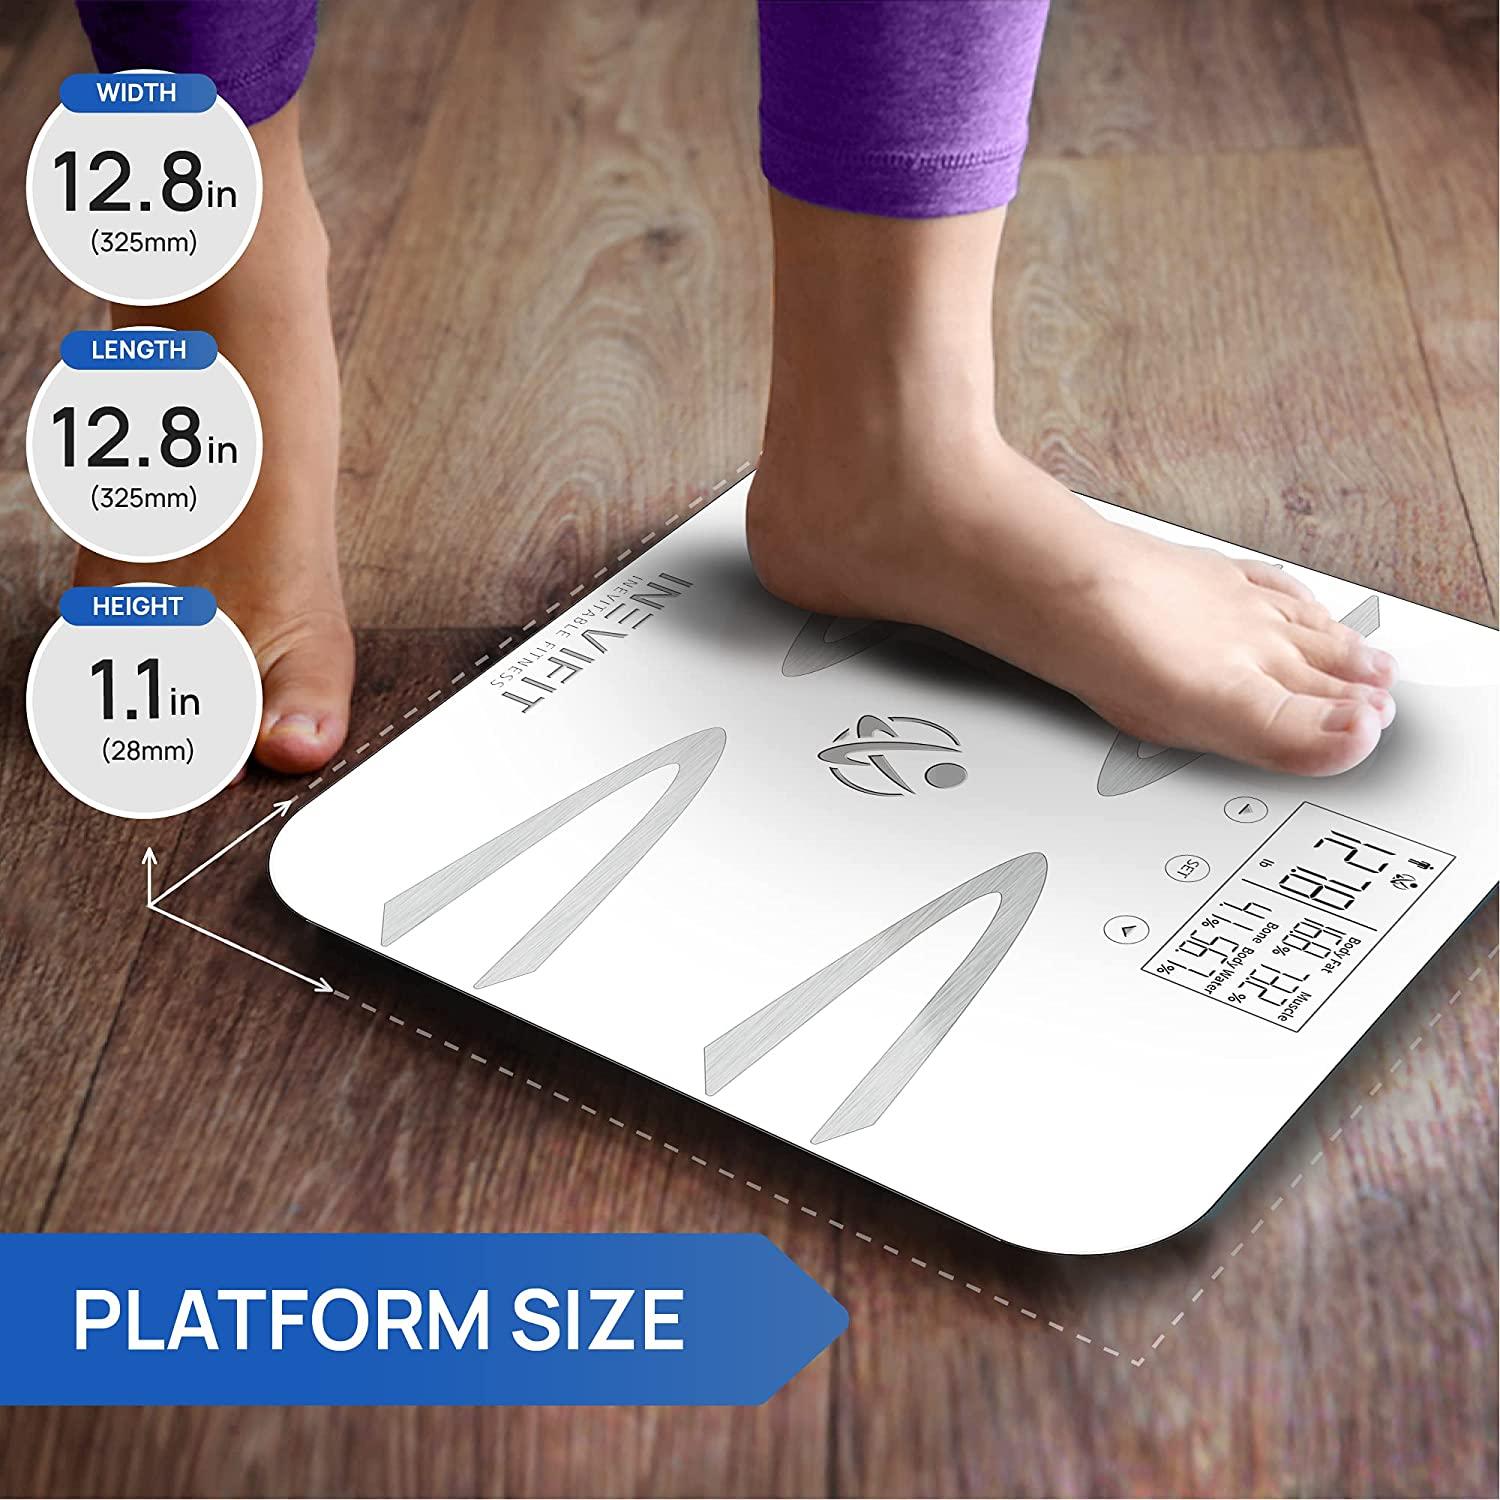 INEVIFIT BODY-ANALYZER SCALE, Highly Accurate Digital Bathroom Body  Composition Analyzer, Measures Weight, Body Fat, Water, Muscle, BMI,  Visceral Fat & Bone Mass for 10 Users 